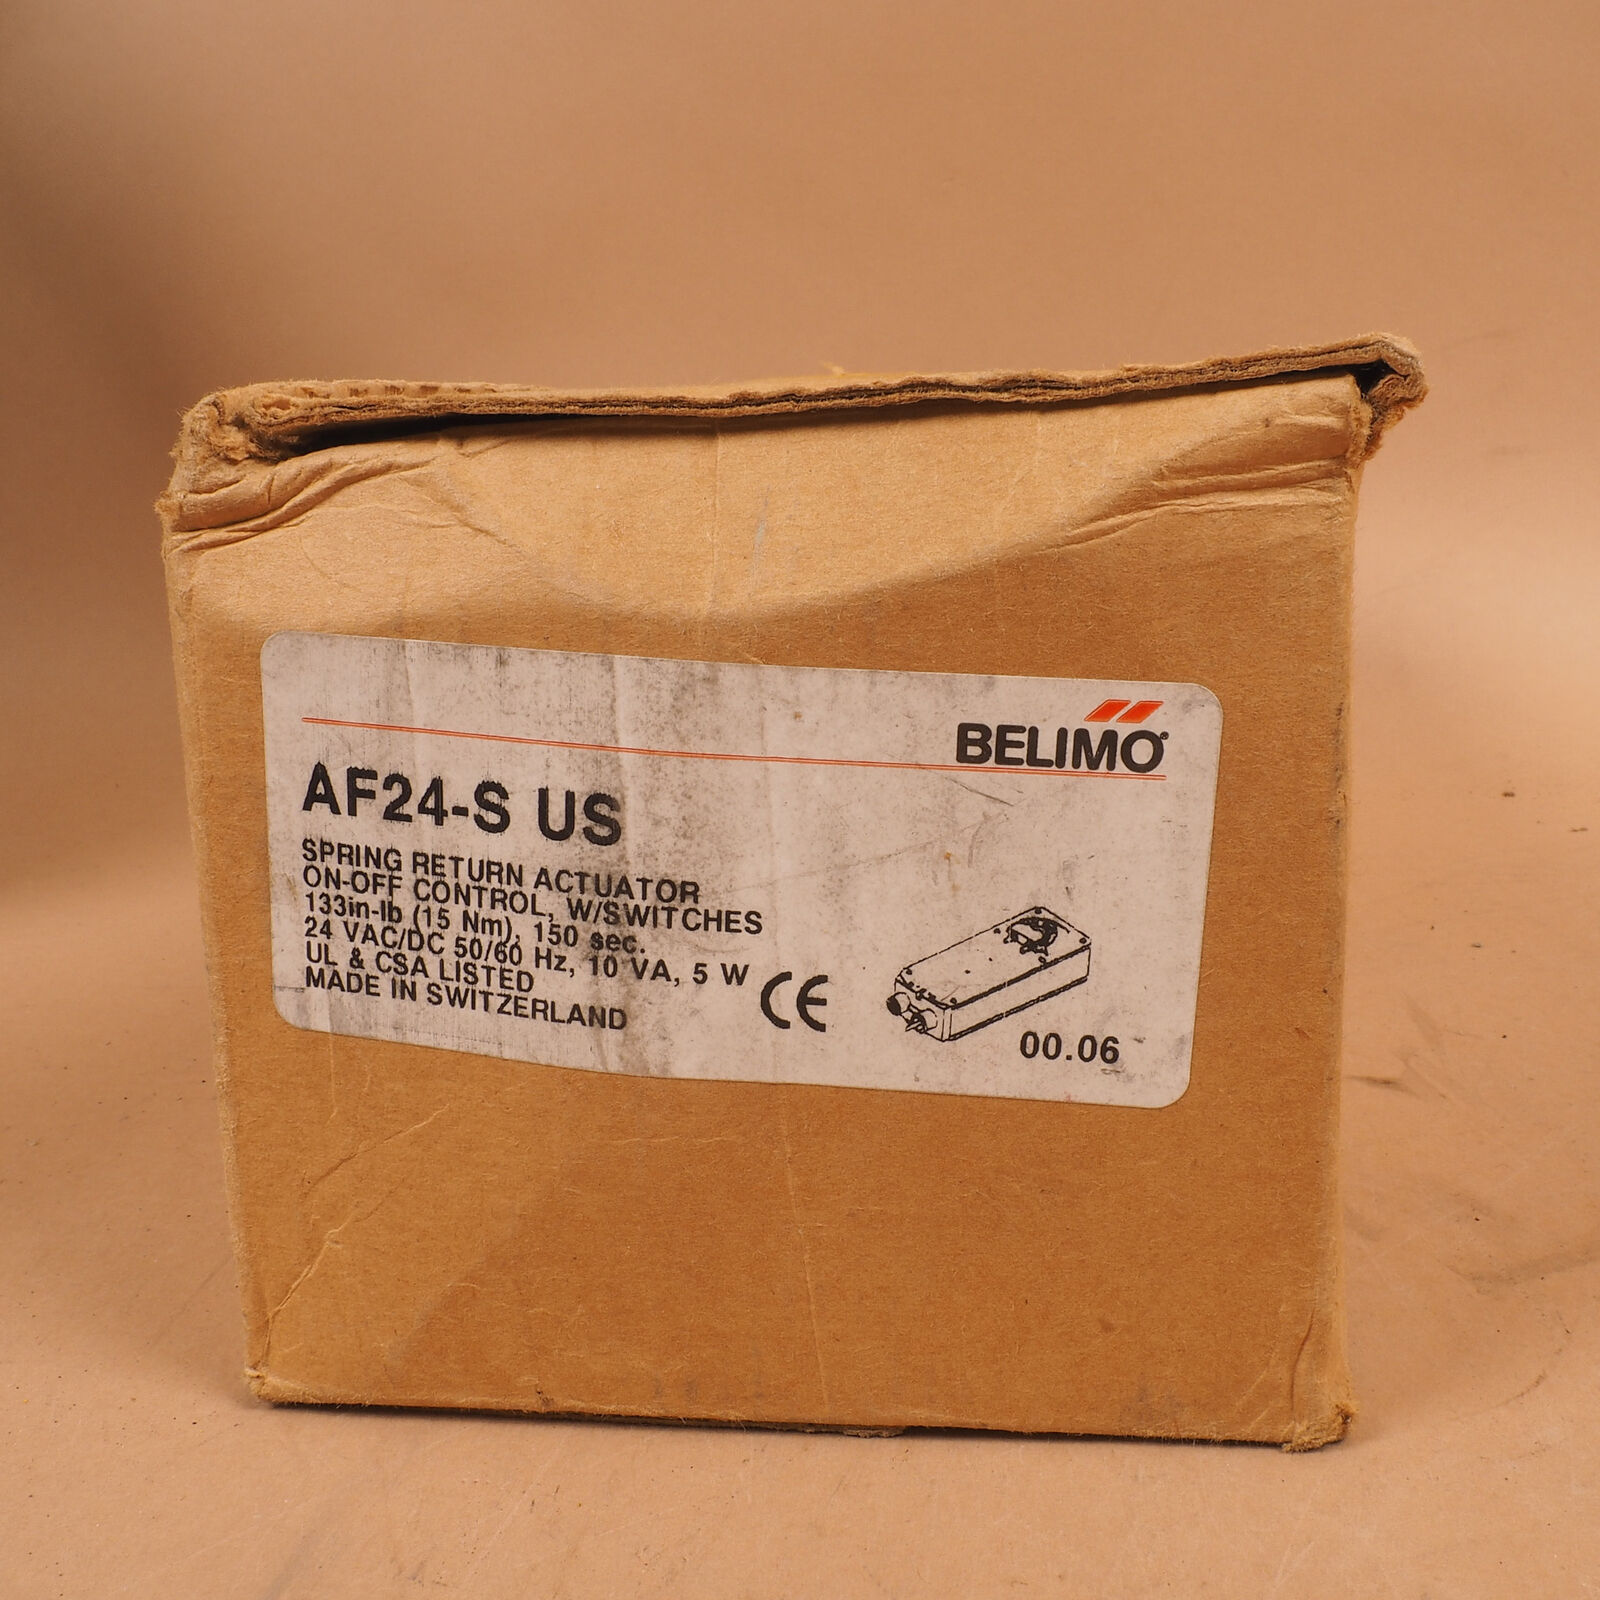 Belimo Af24-s Us Spring Return Actuator On-off Control W Switches 24v Ac/dc